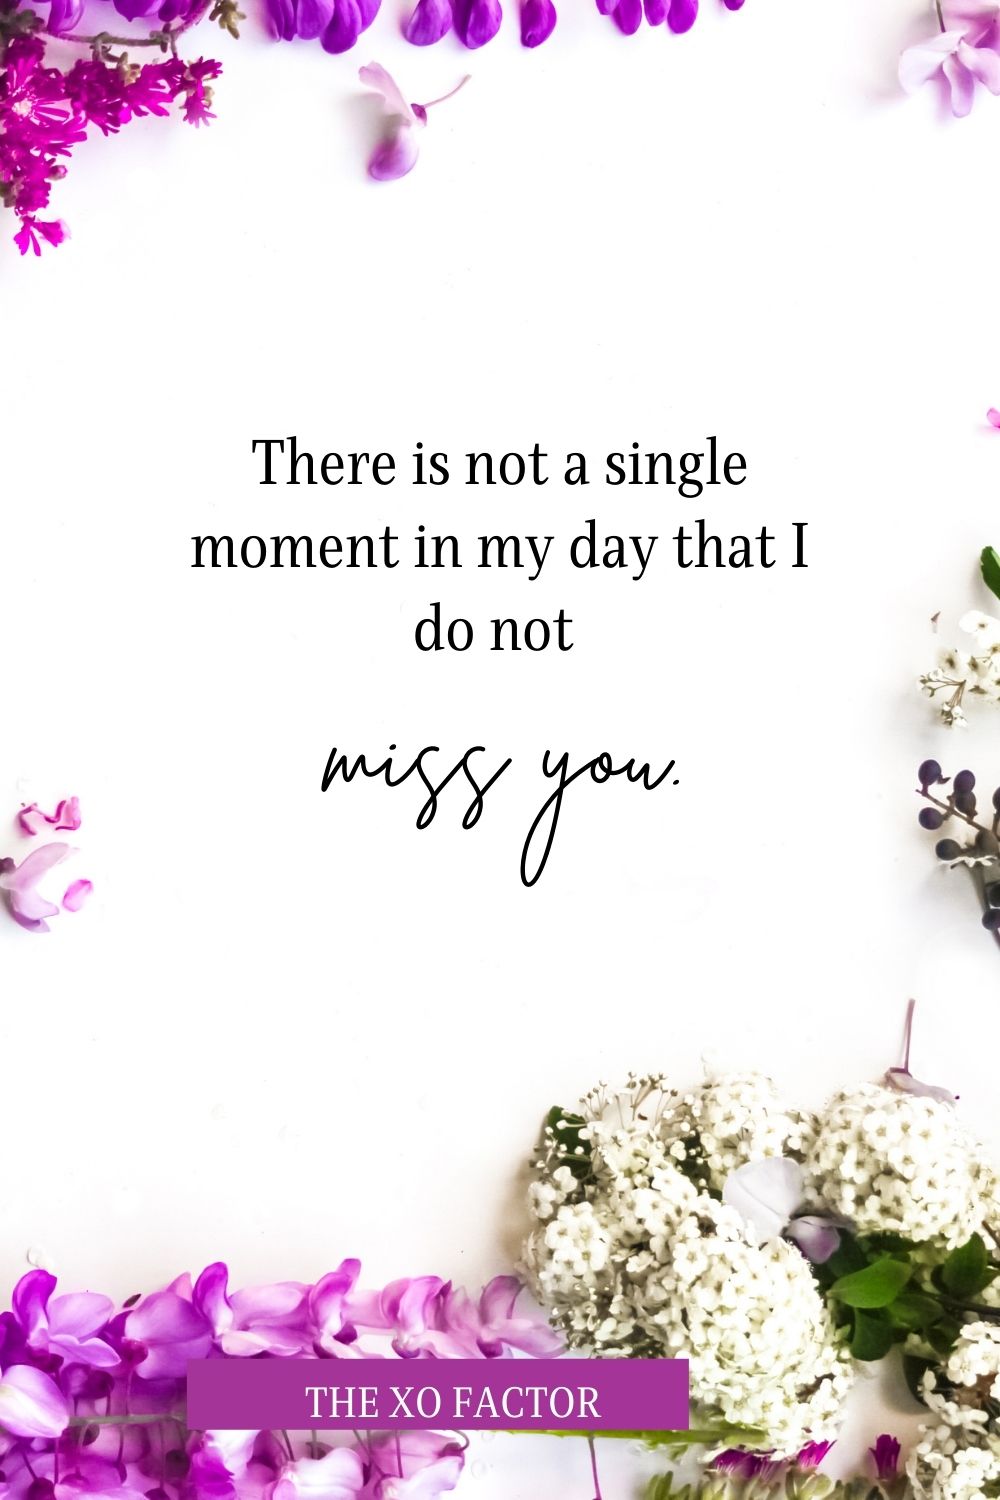 There is not a single moment in my day that I do not miss you.